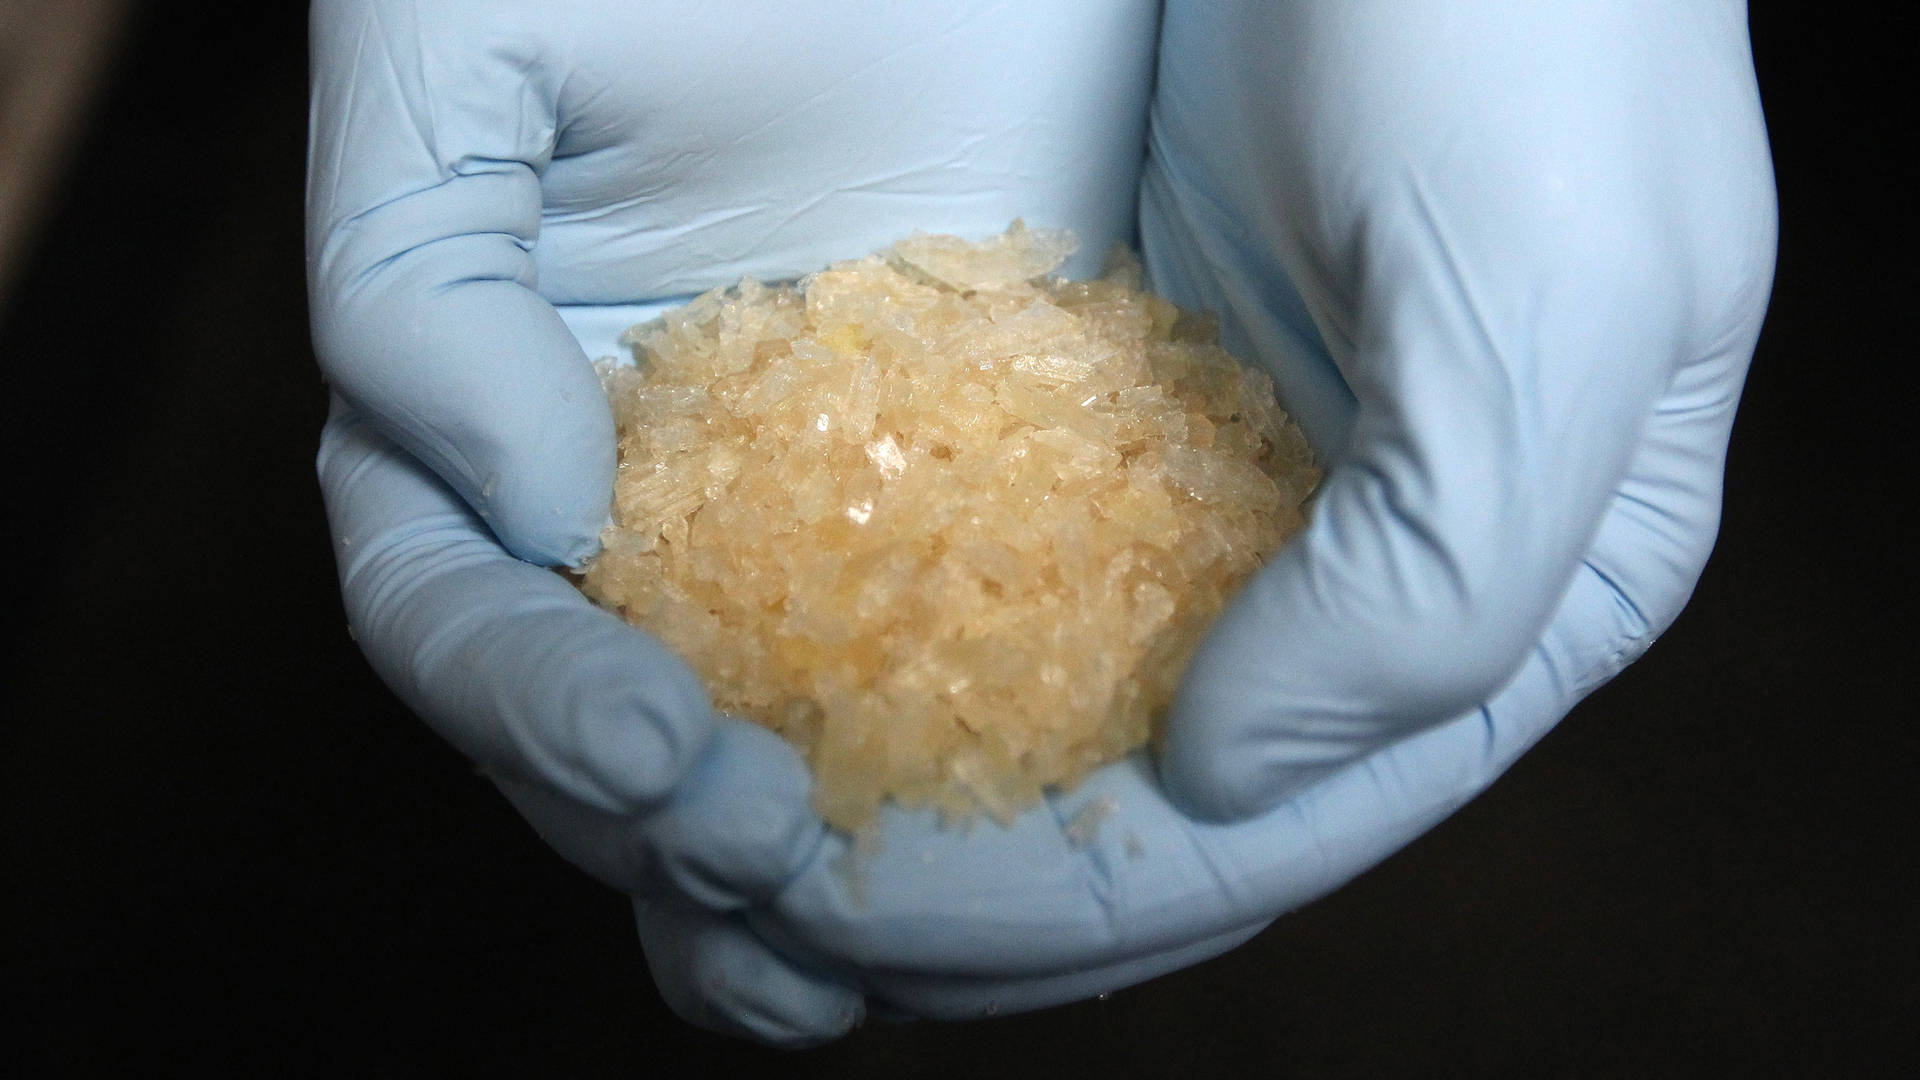 Methamphetamine is back. The toll the drug is taking on the city’s public health, emergency response and police departments is now spurring Mayor London Breed to address the epidemic. Daniel Roland/Getty Images